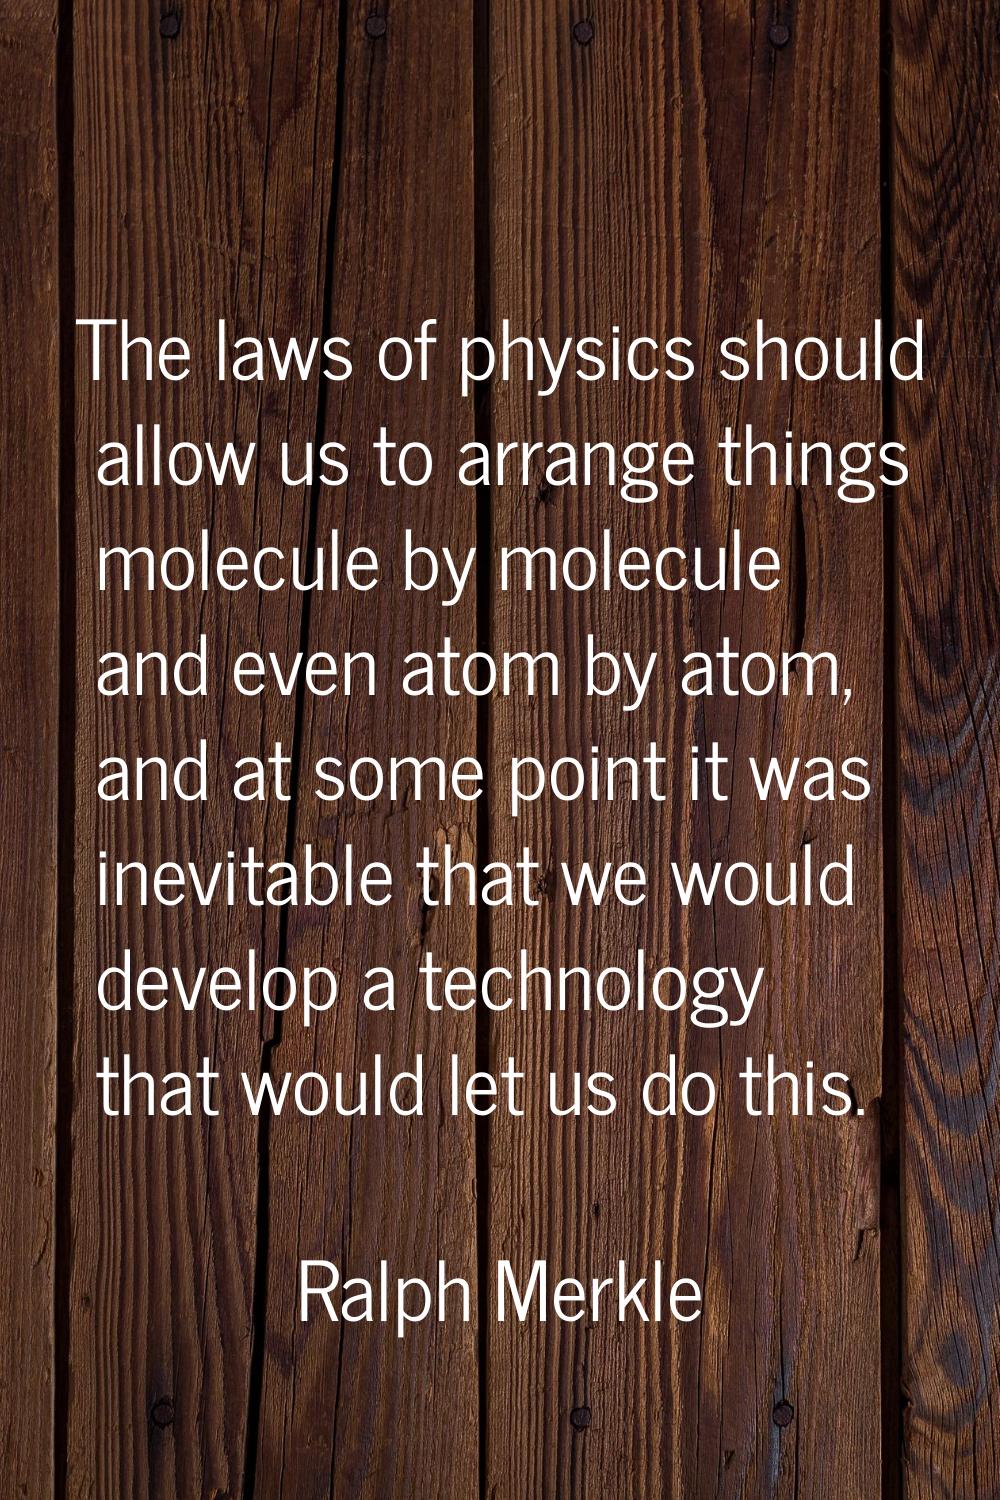 The laws of physics should allow us to arrange things molecule by molecule and even atom by atom, a